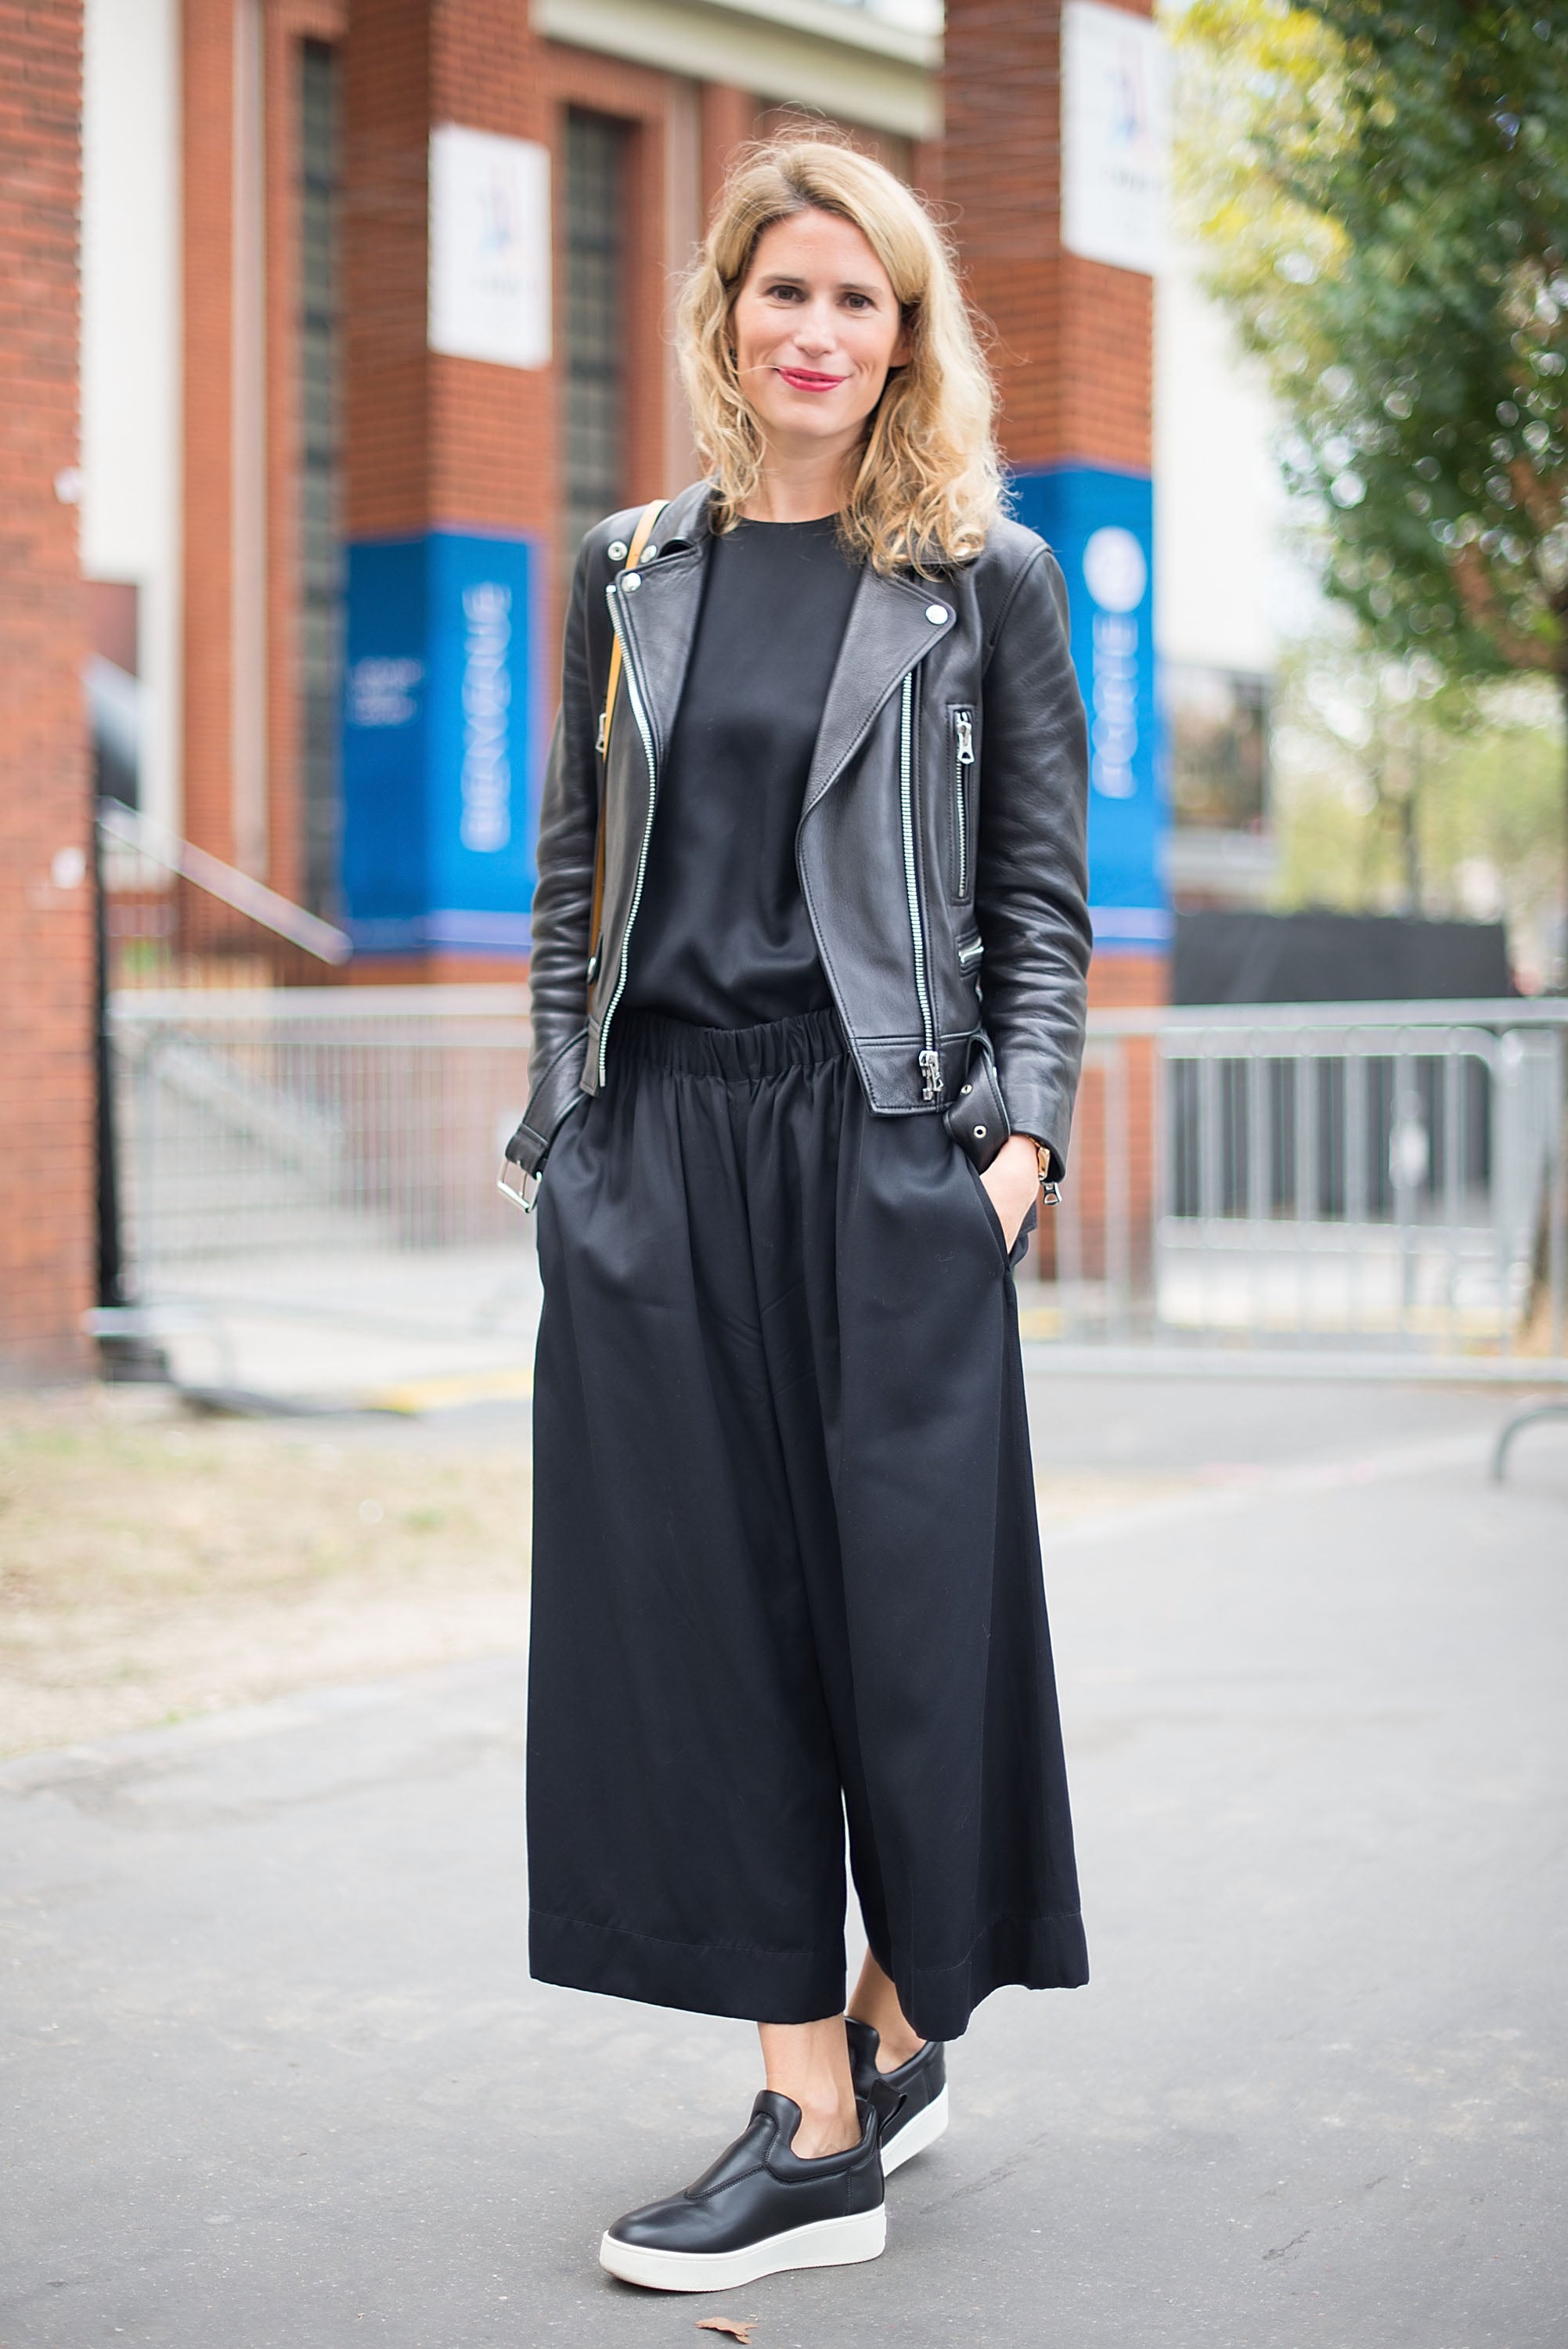 Hot Rainy Day Outfits: Culottes